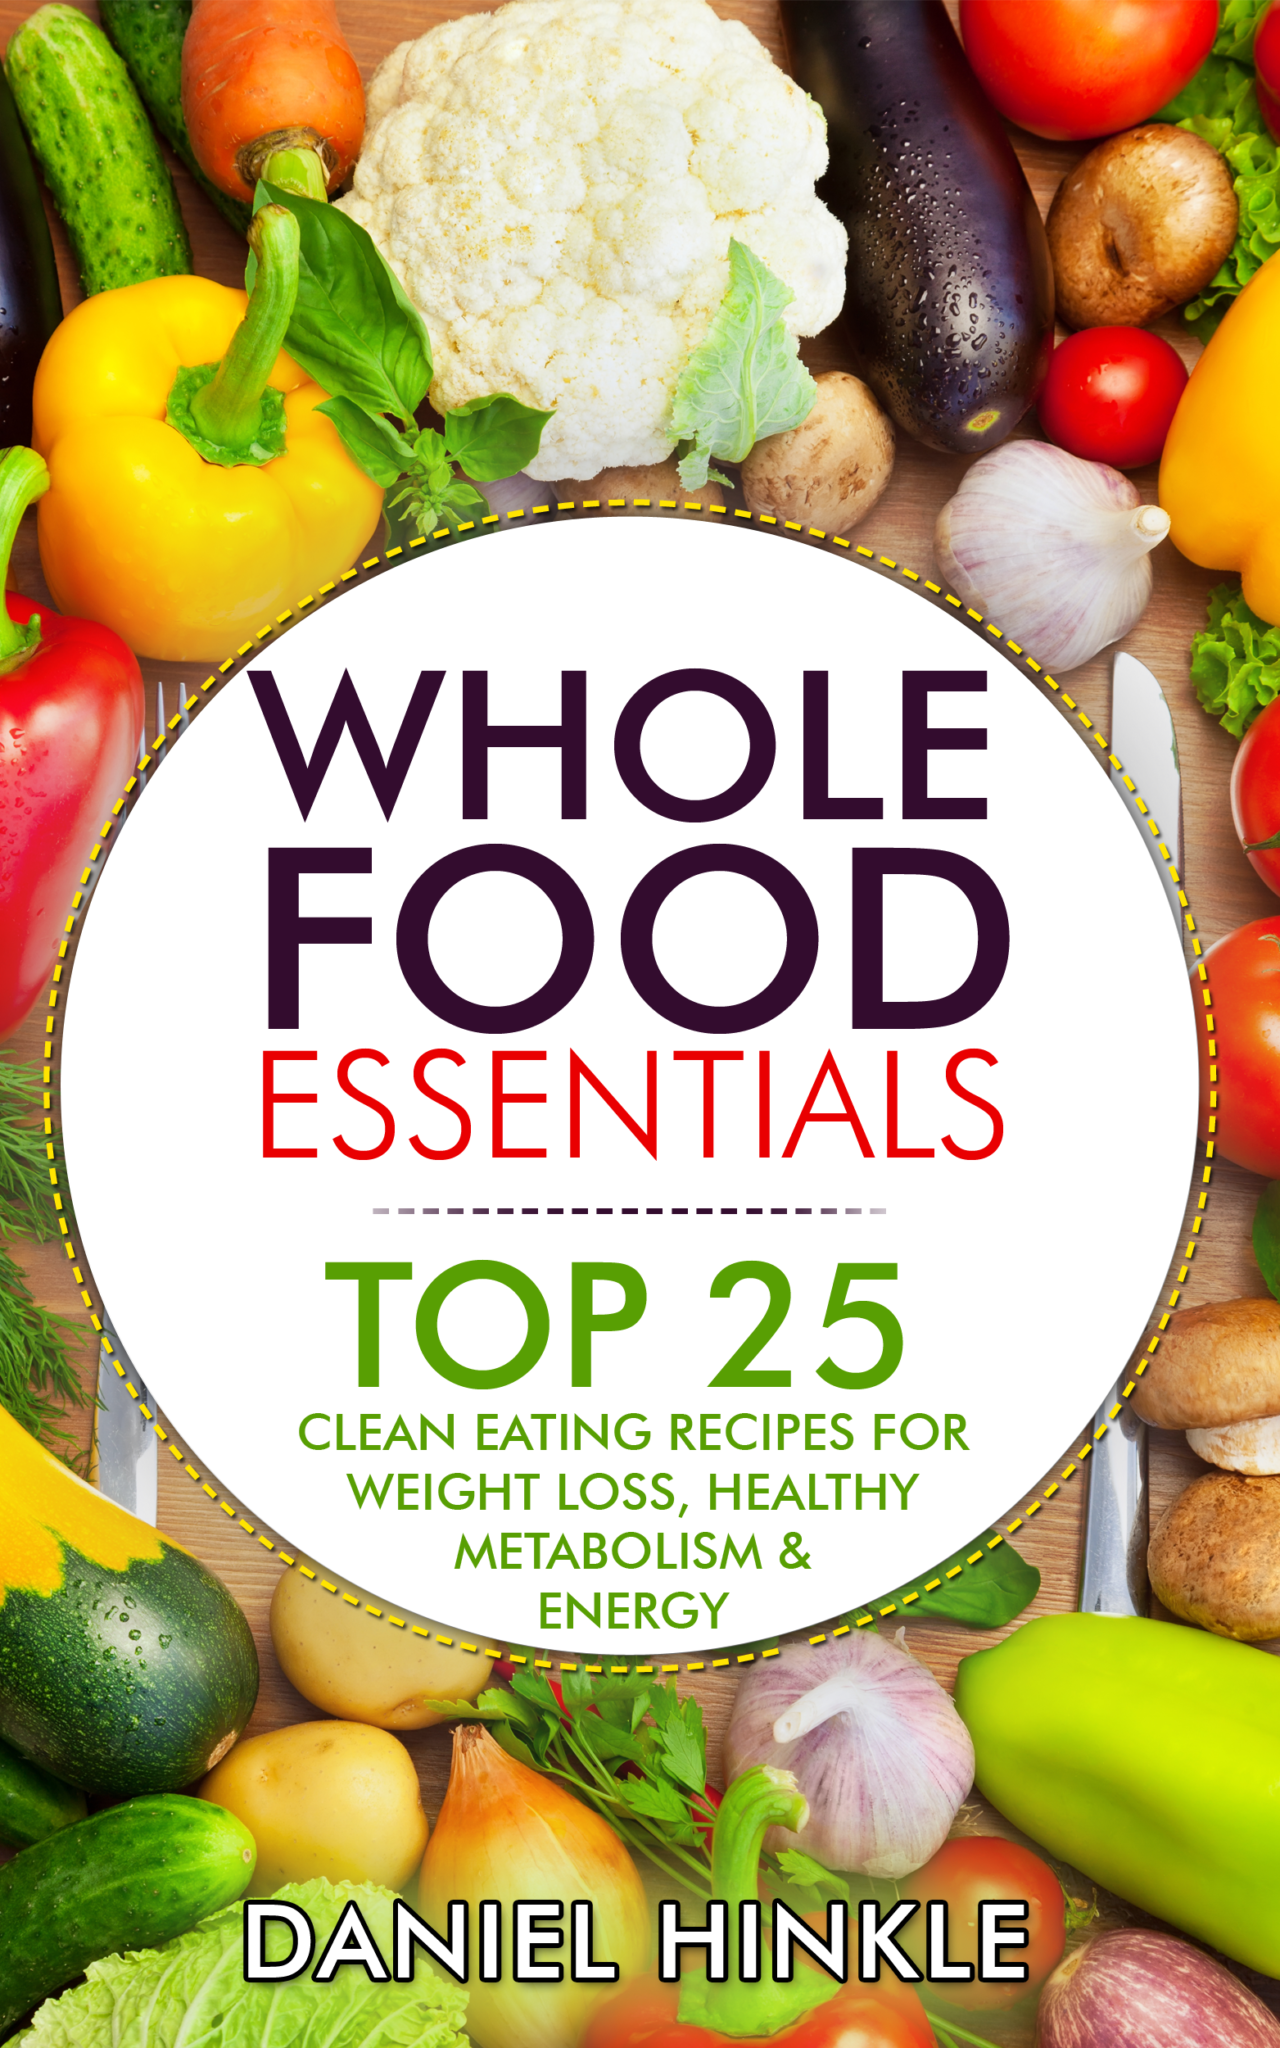 FREE: Whole Food Essentials: TOP 25 Clean Eating Recipes for Weight Loss, Healthy Metabolism & Energy by Daniel Hinkle